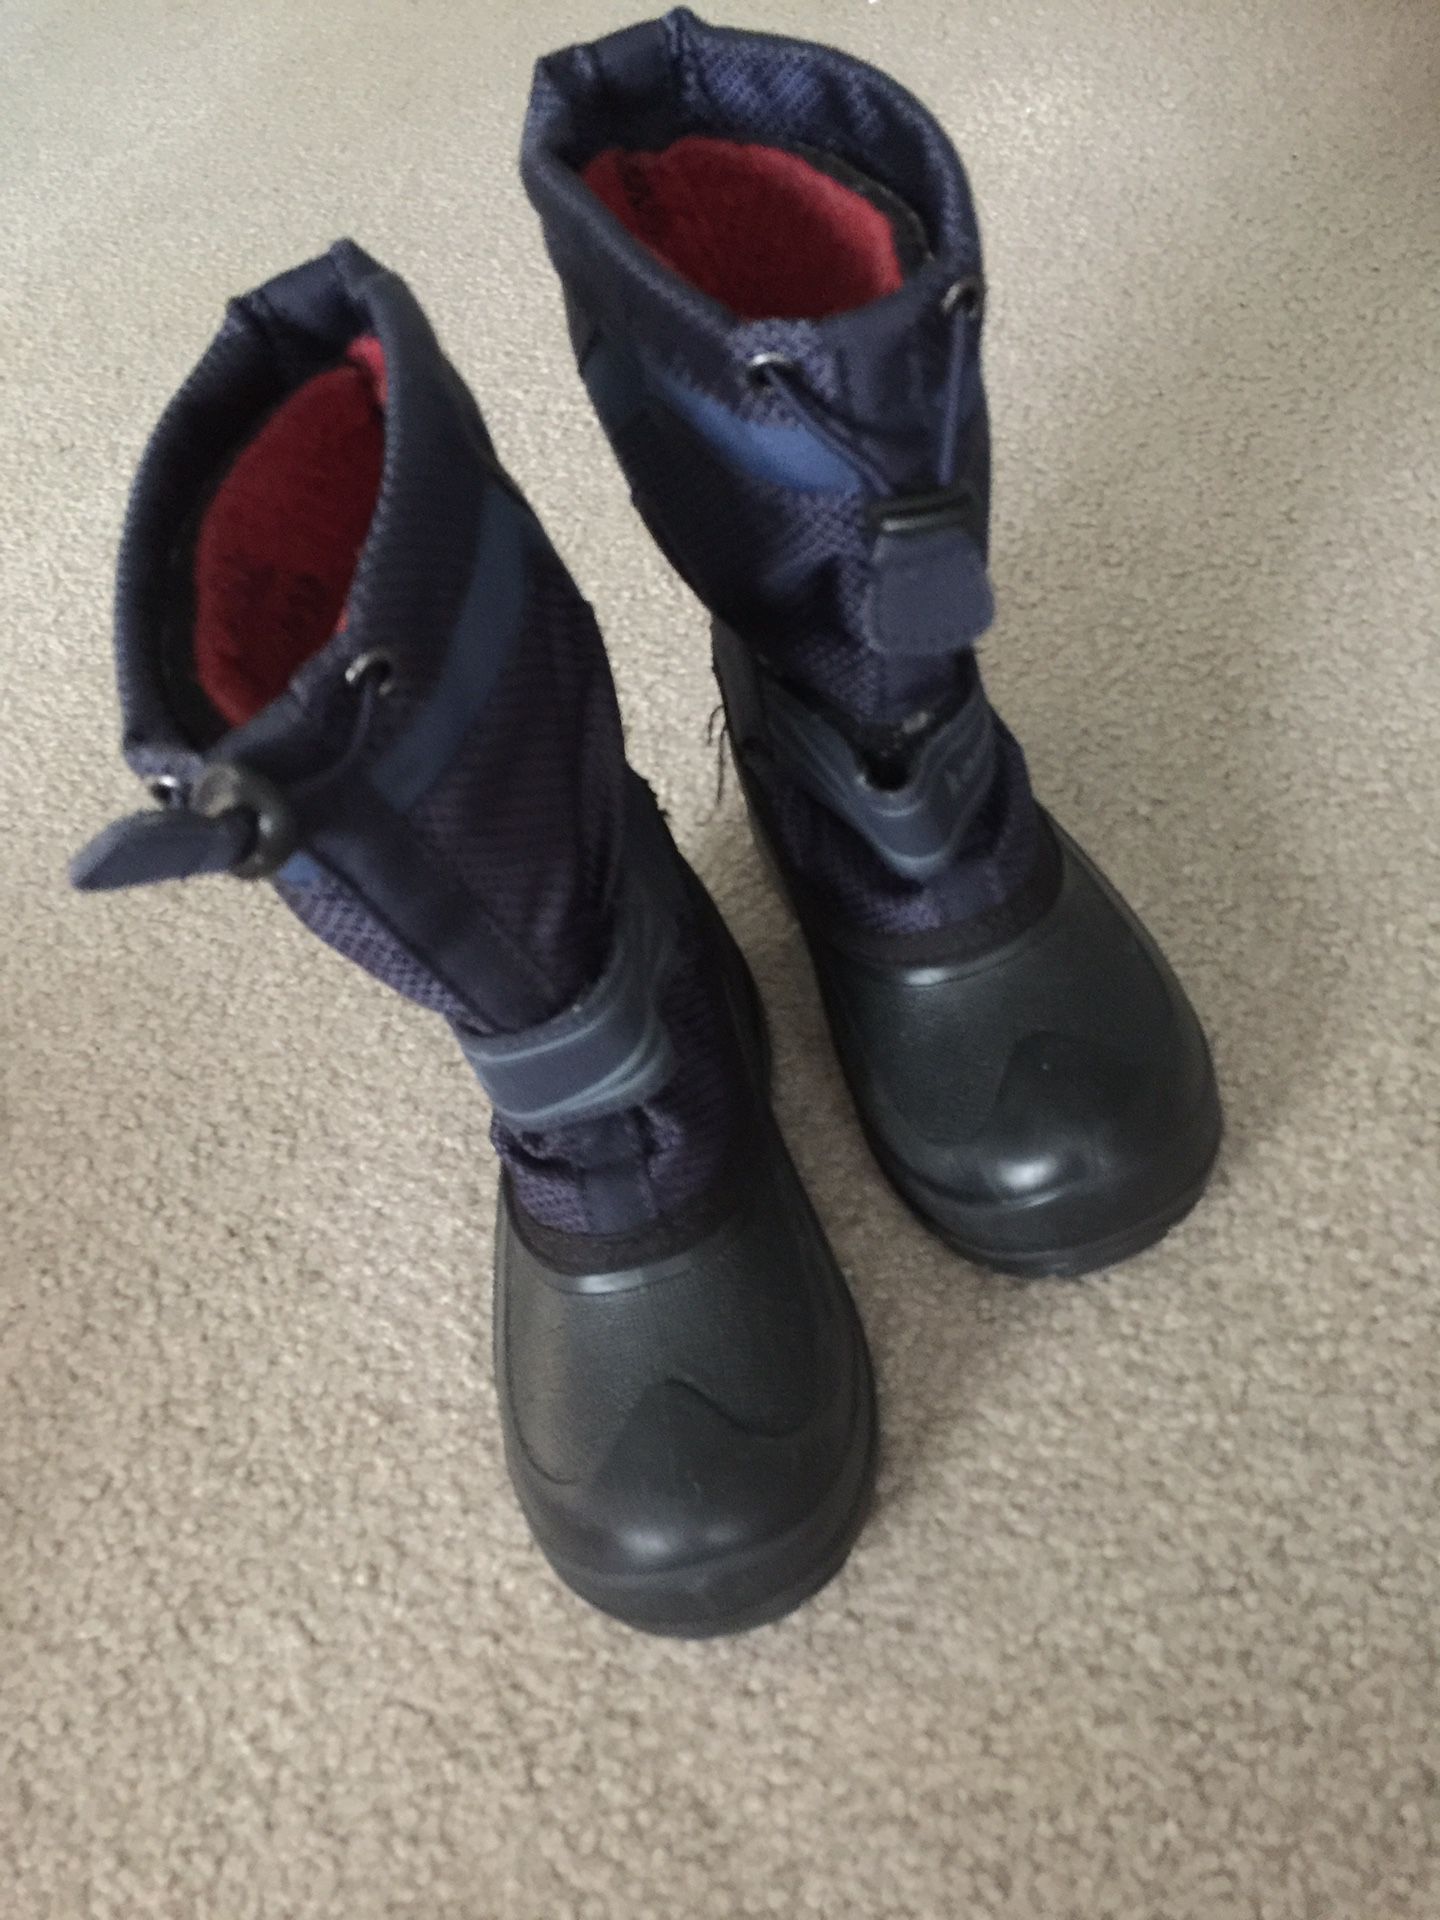 Boys winter/snow boots size 11